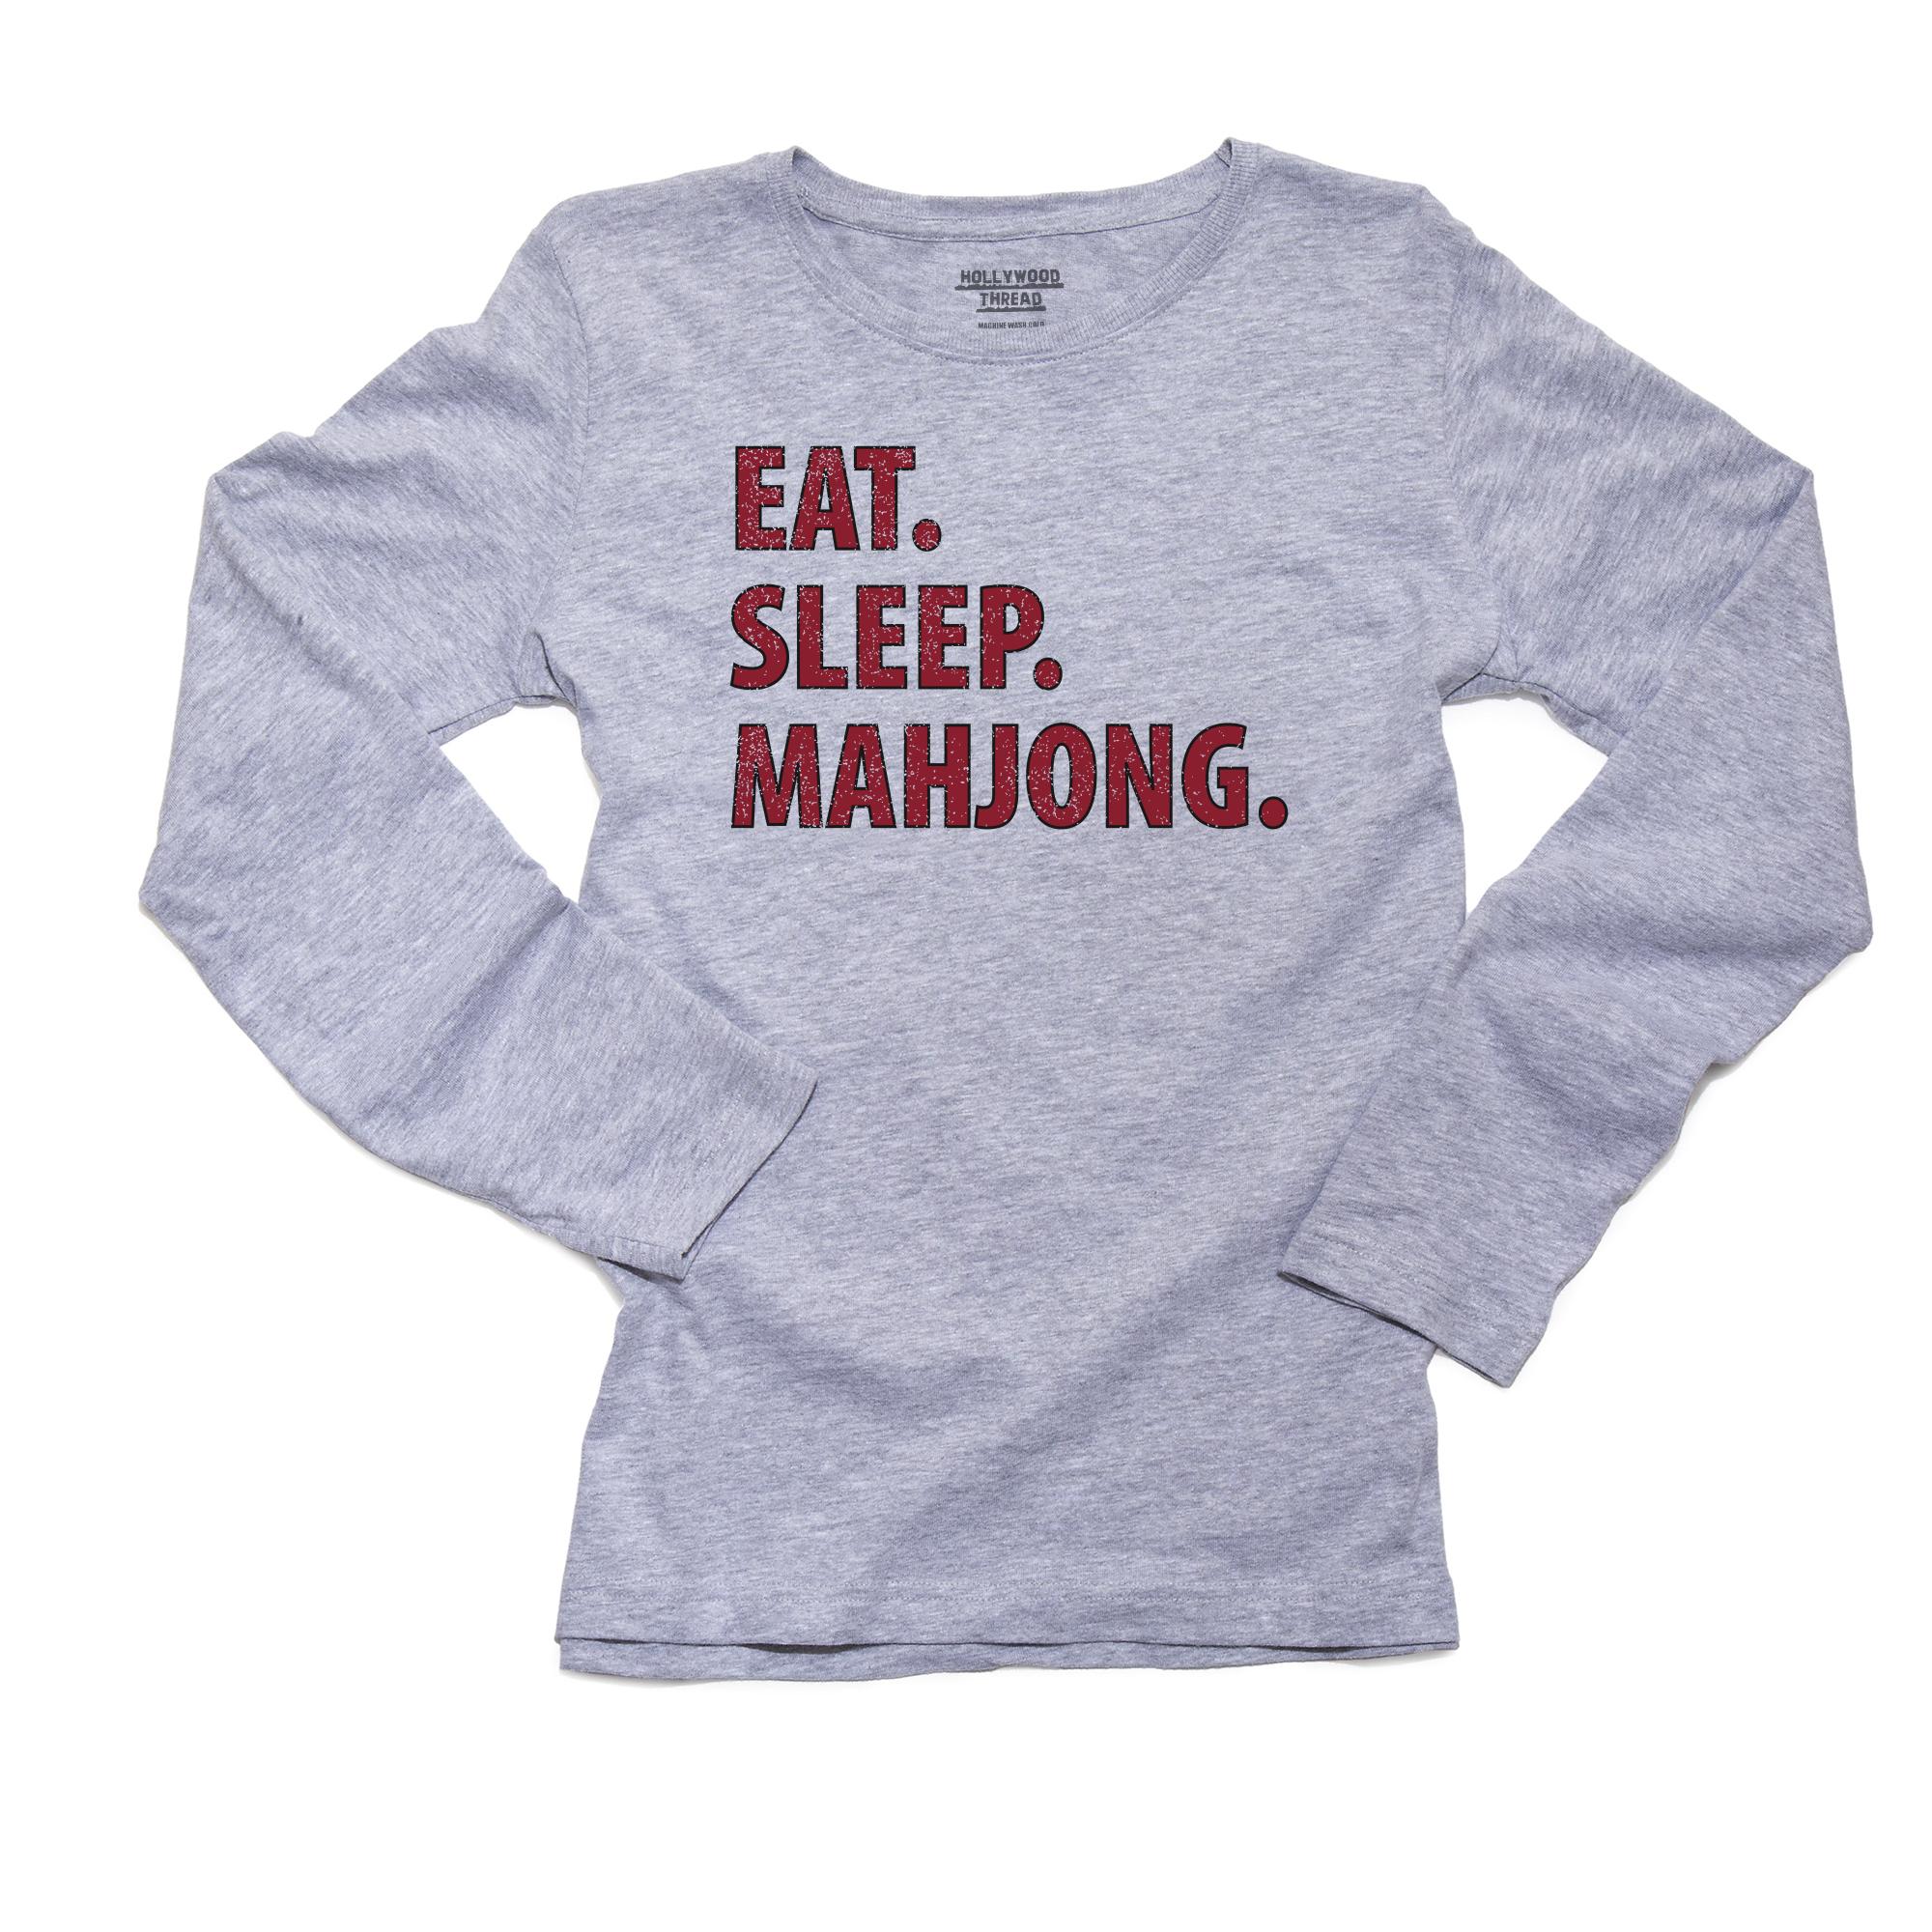 Eat Sleep. Mahjong. - Asian Game Lucky Red Front Women's Long Sleeve Grey T-Shirt - image 1 of 2